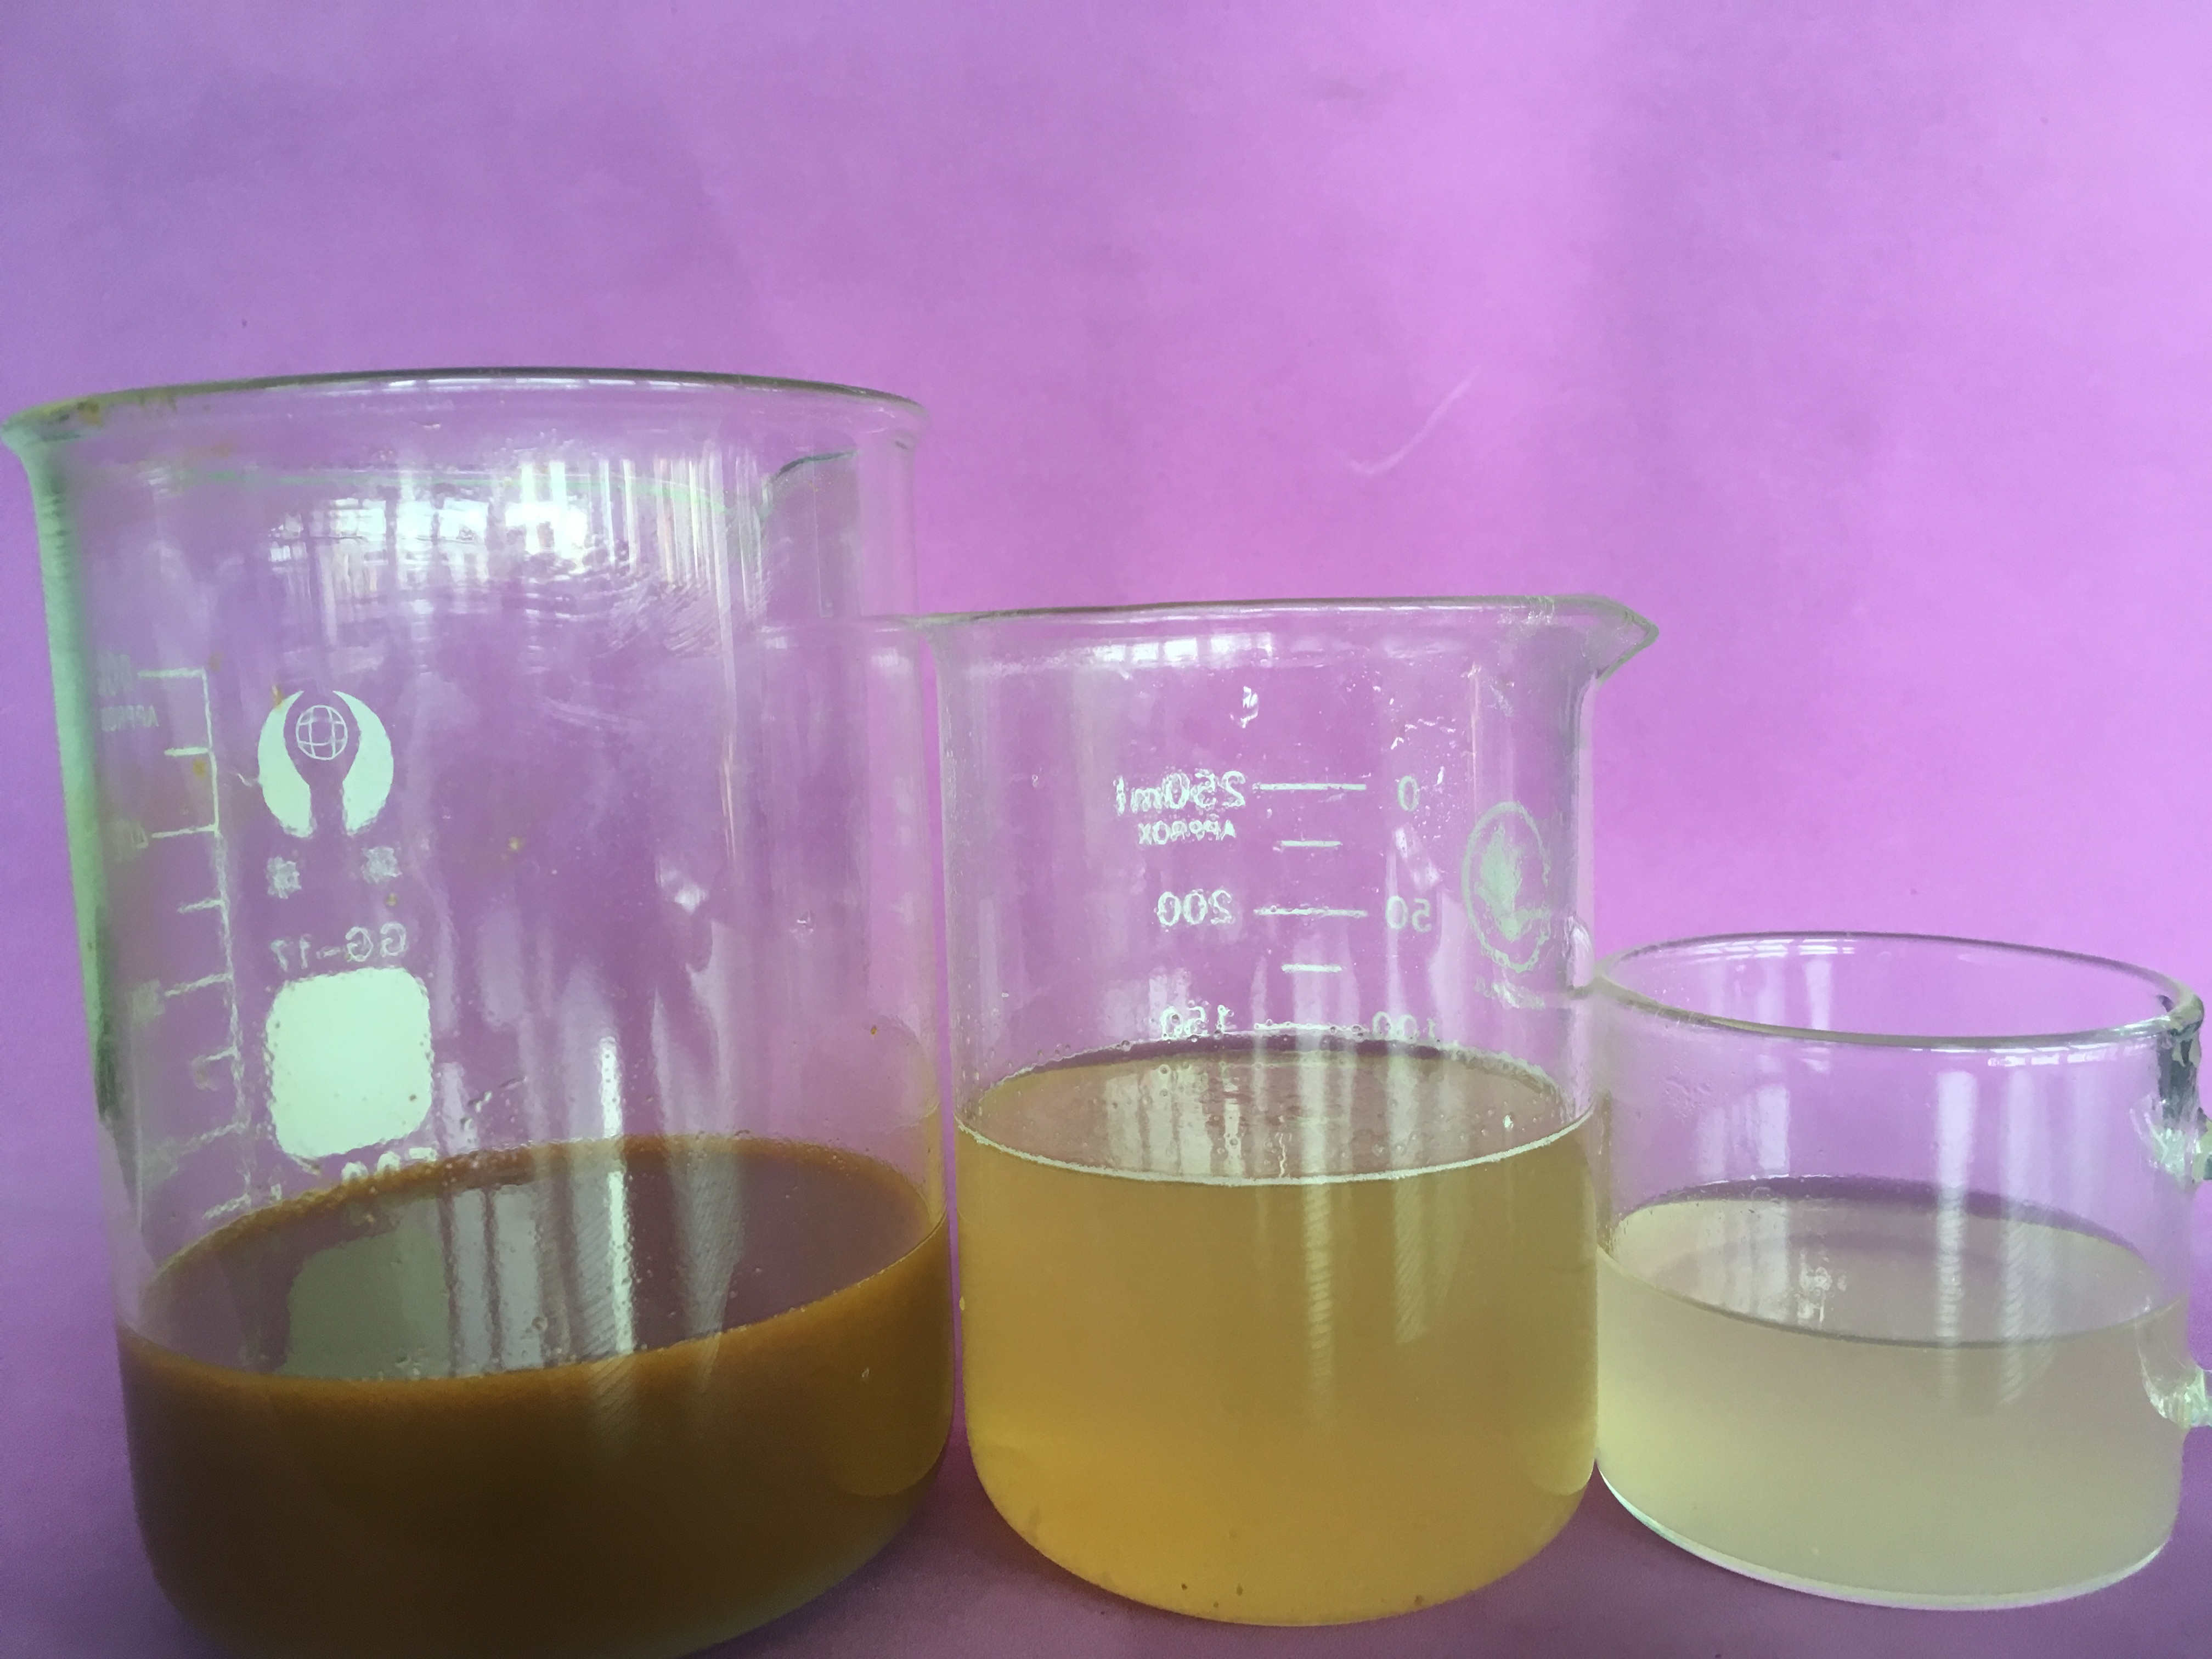 polyaluminium chloride/PAC colorless or light yellow solid. When dissolved in water, it can form a turbid solution.